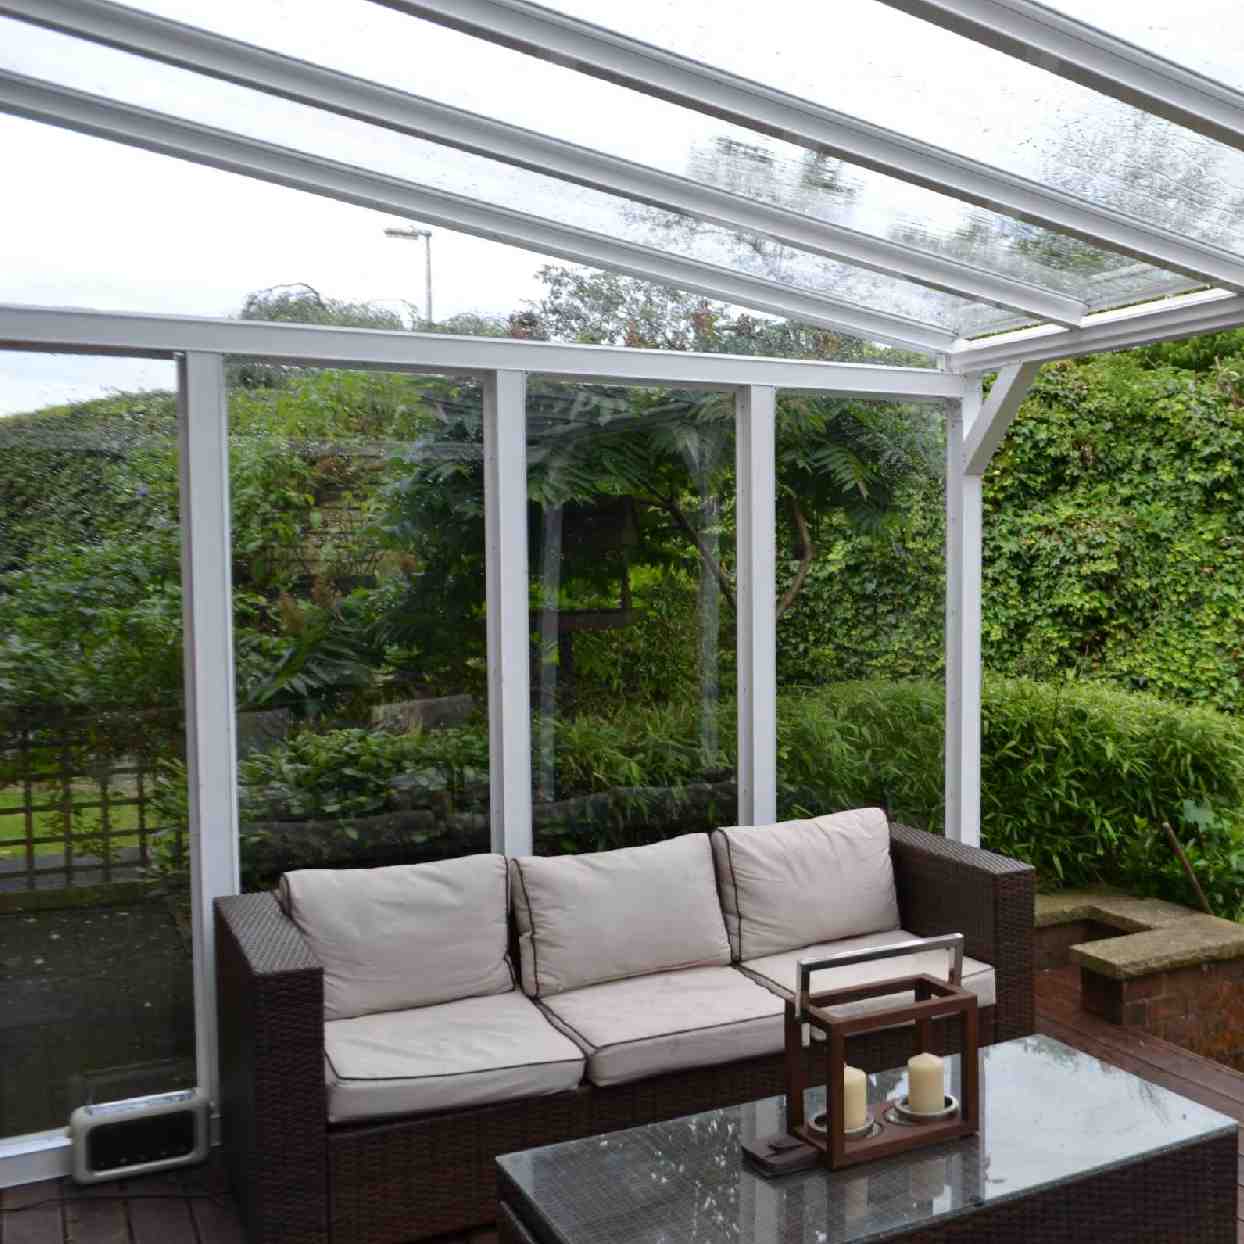 Buy Omega Verandah White with 16mm Polycarbonate Glazing - 4.2m (W) x 4.5m (P), (3) Supporting Posts online today